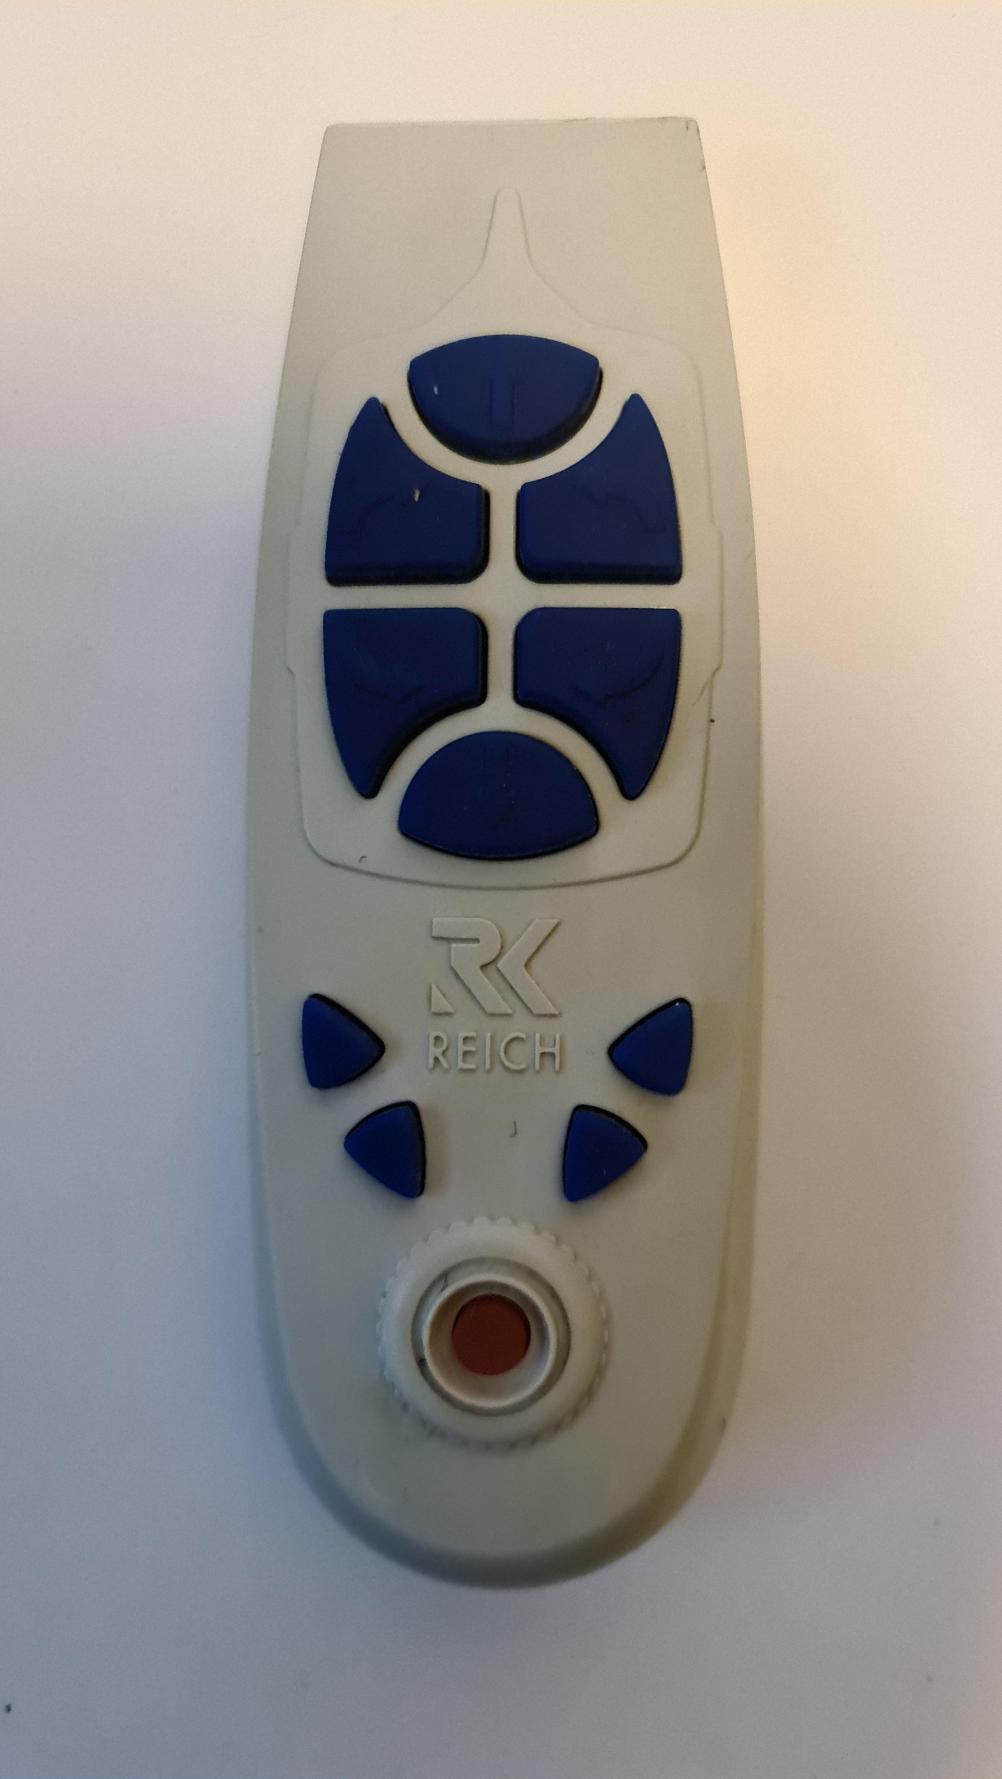 Reich  Remote Control - Front Image